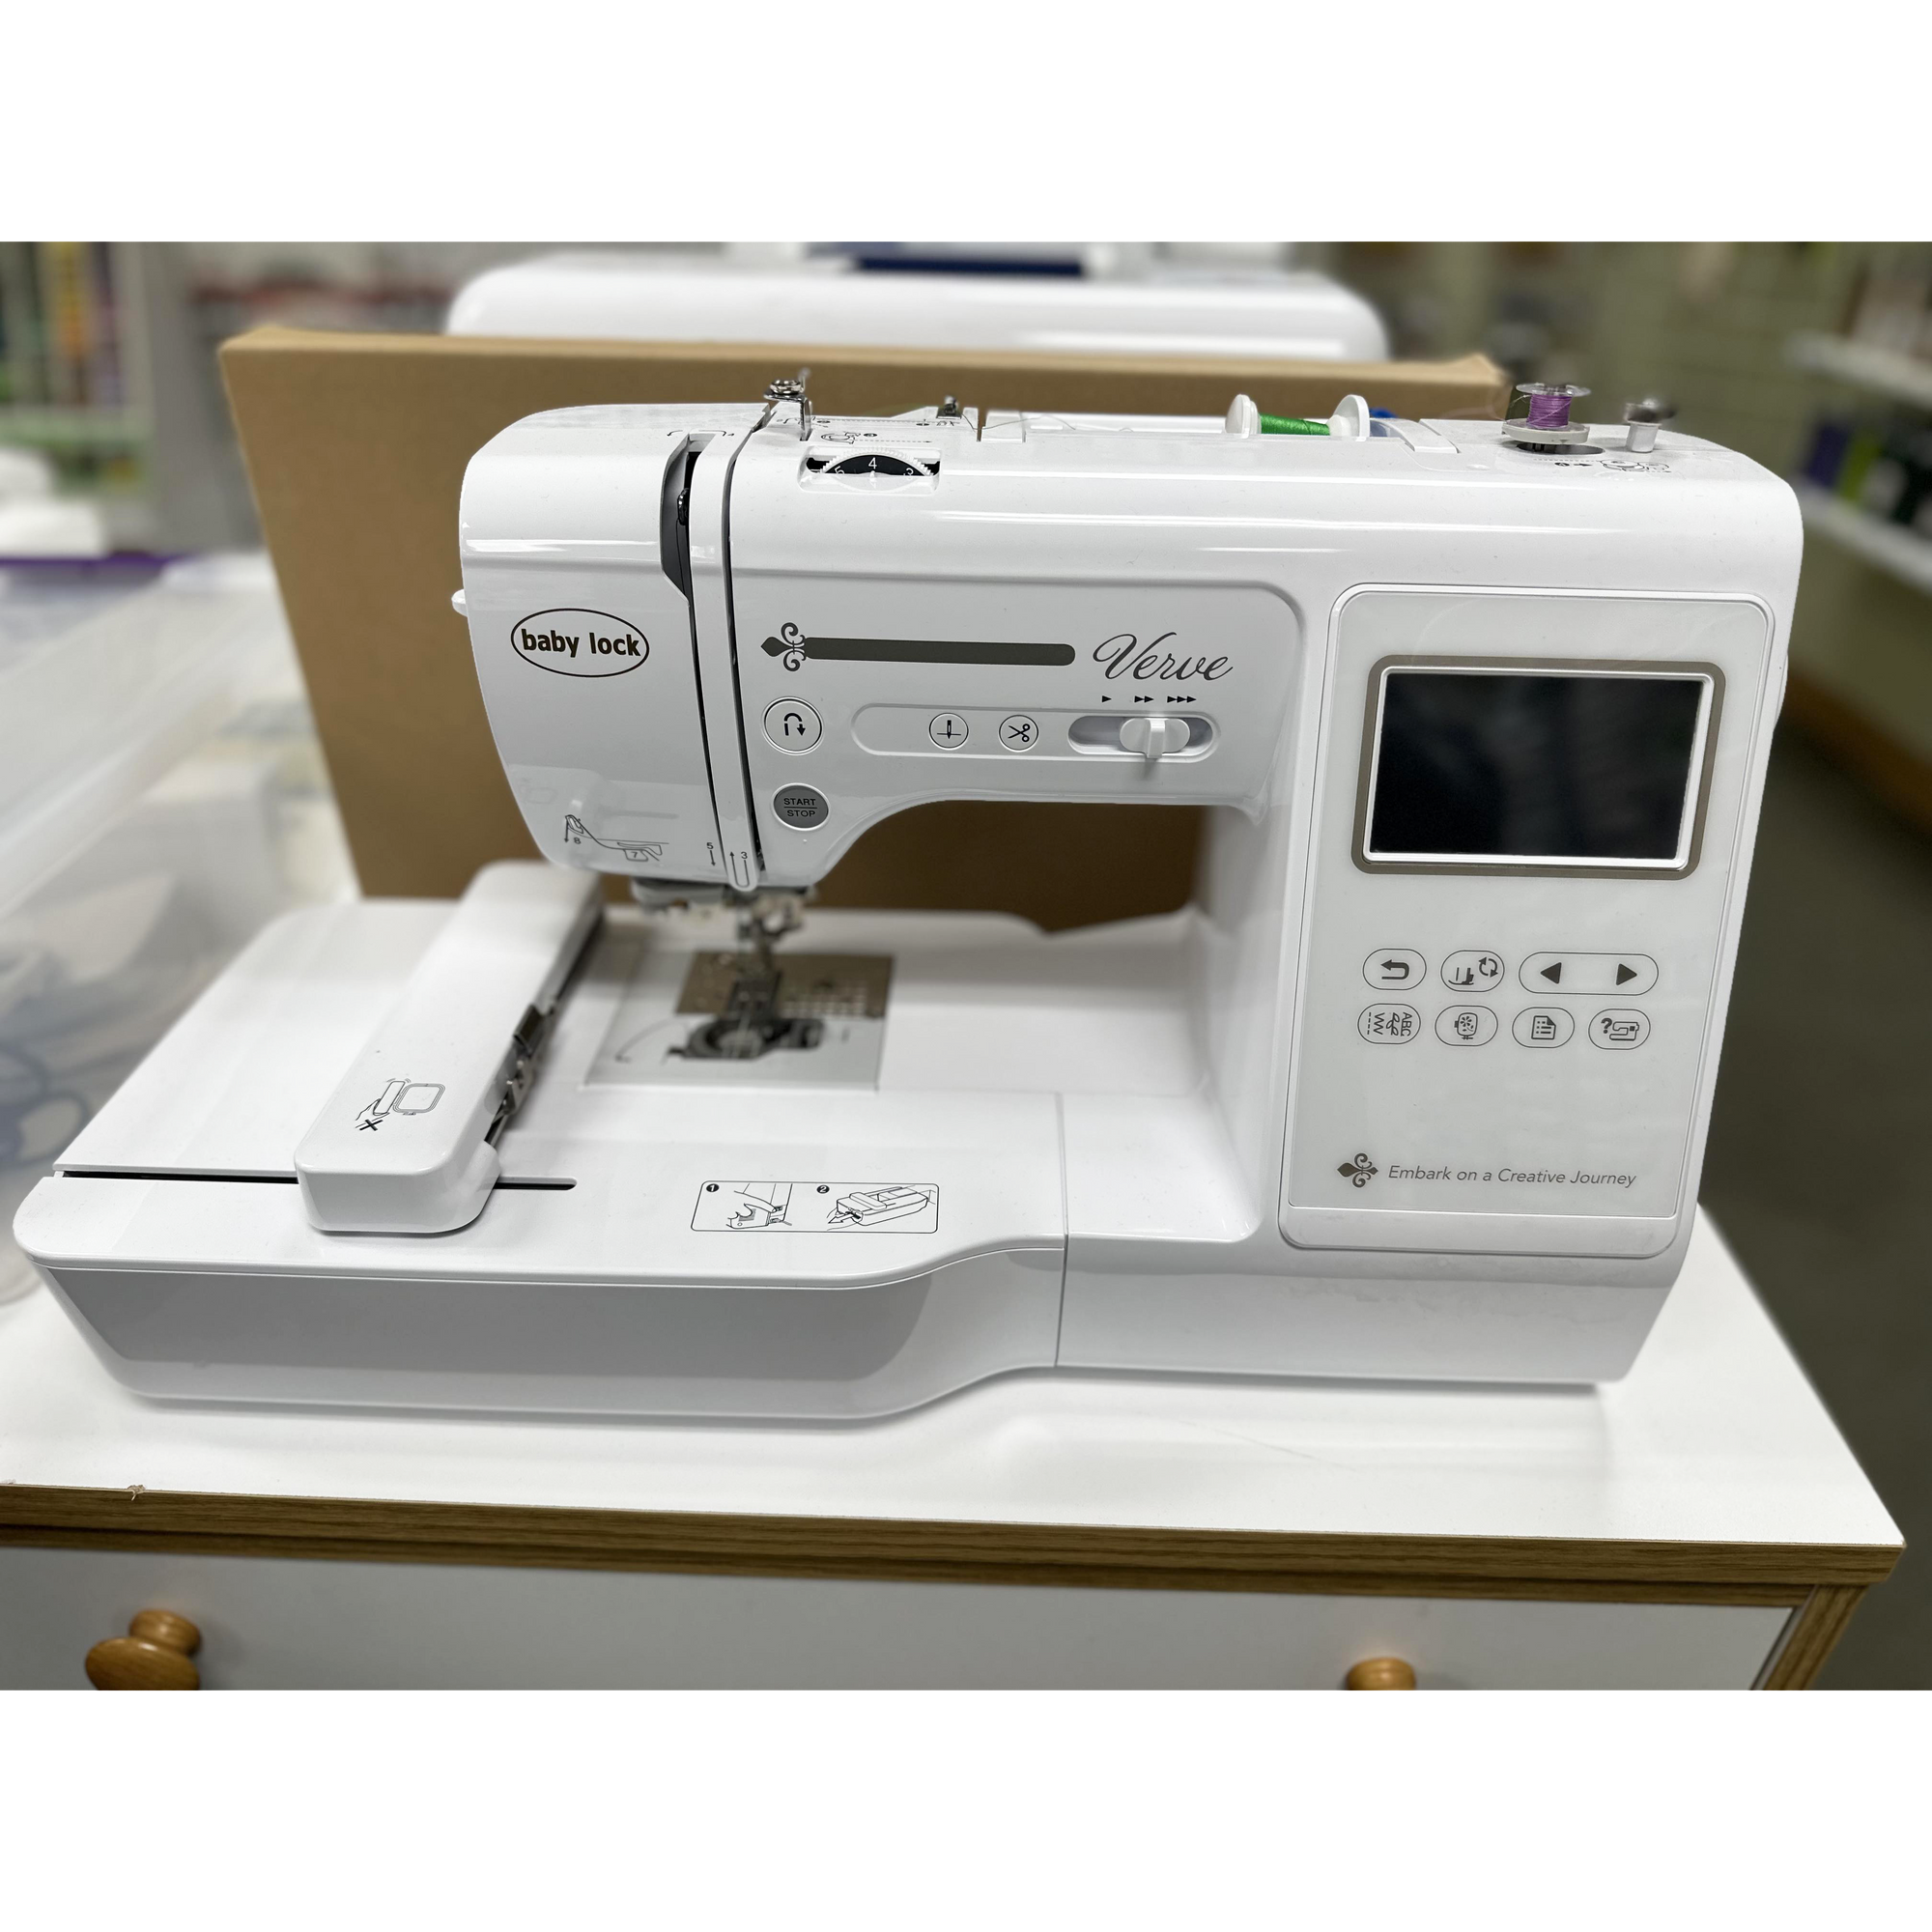 Used Baby Lock Verve Sewing and Embroidery Machine